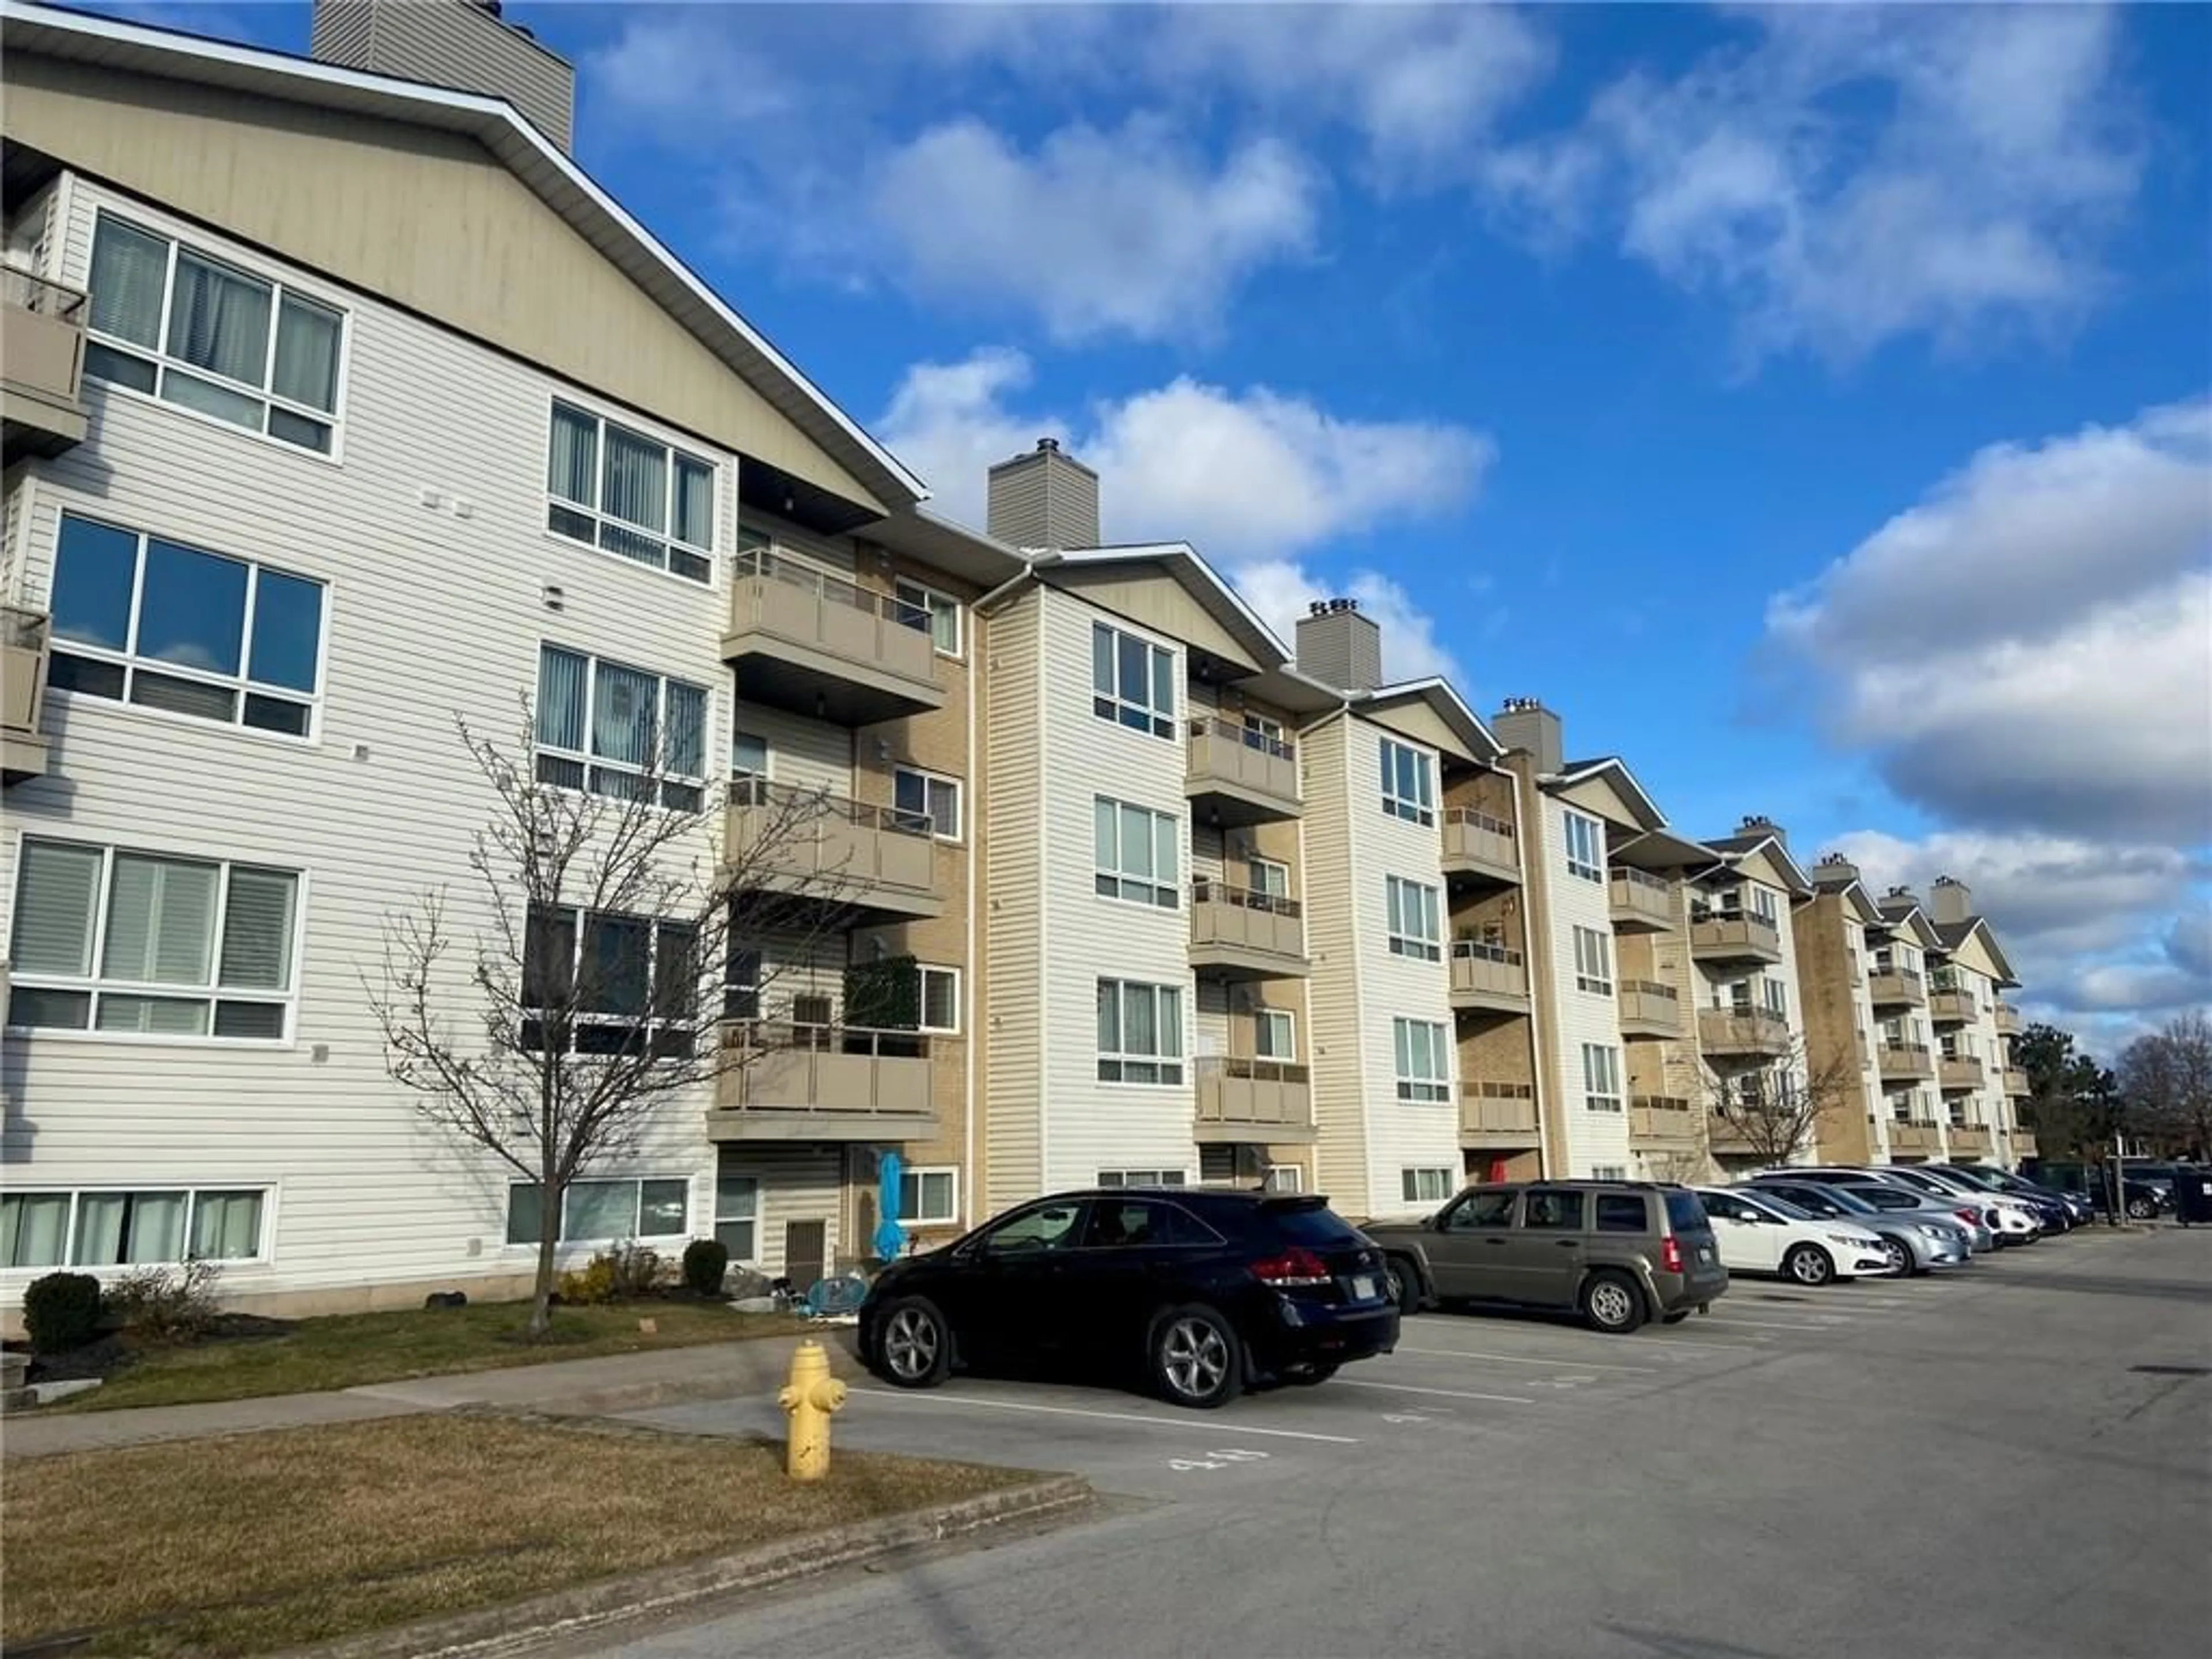 Street view for 78 Roehampton Ave #116, St. Catharines Ontario L2M 7W9